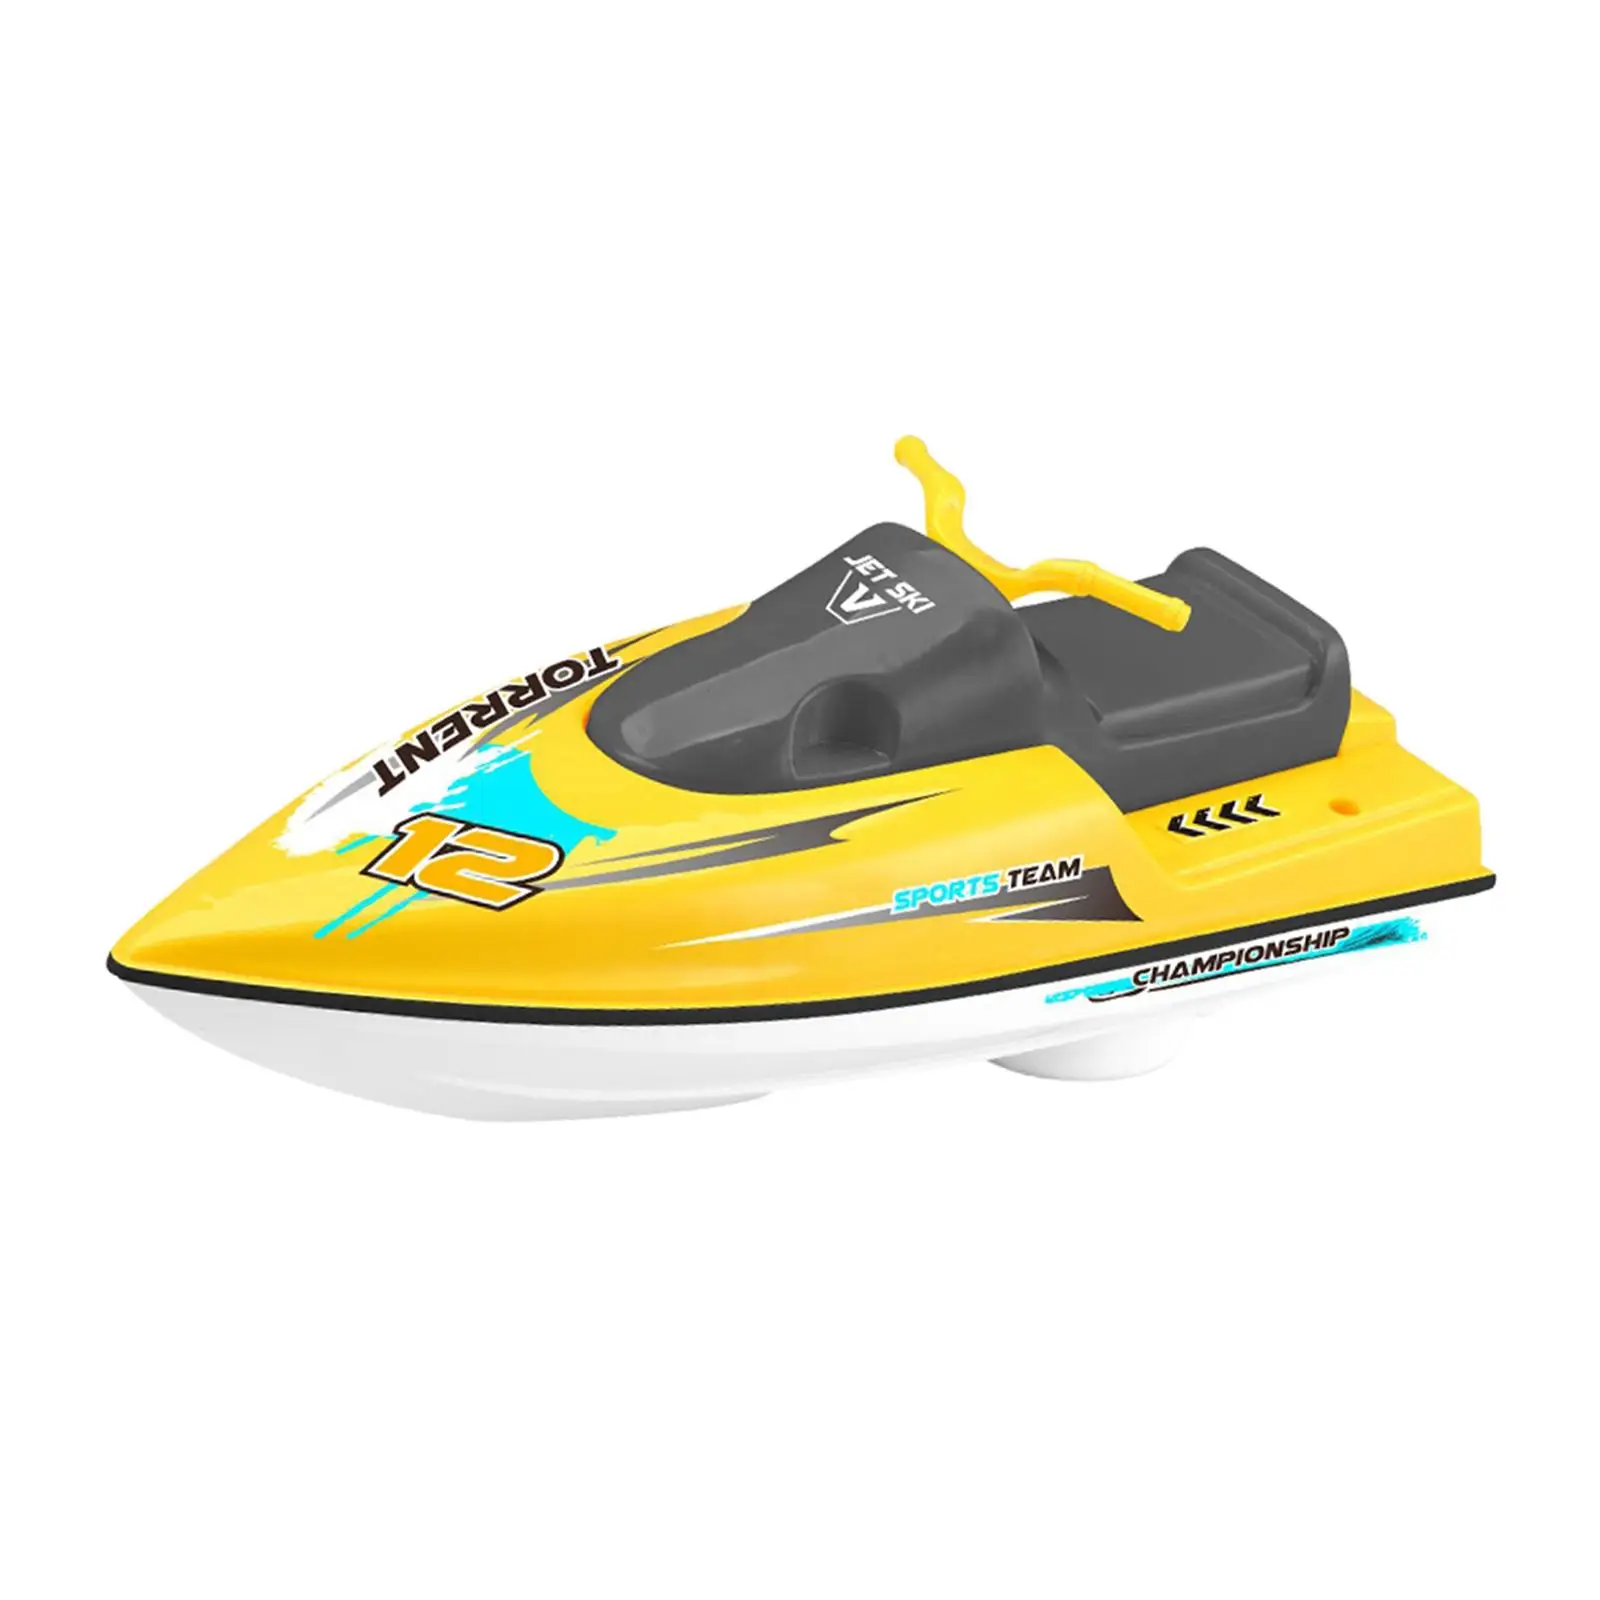 Boat Bathtub Toy Water Toy Floating Toys Pool Bathroom Baby Toy Electric Speed Boat Toy for Infant Baby Toddlers Kids Children